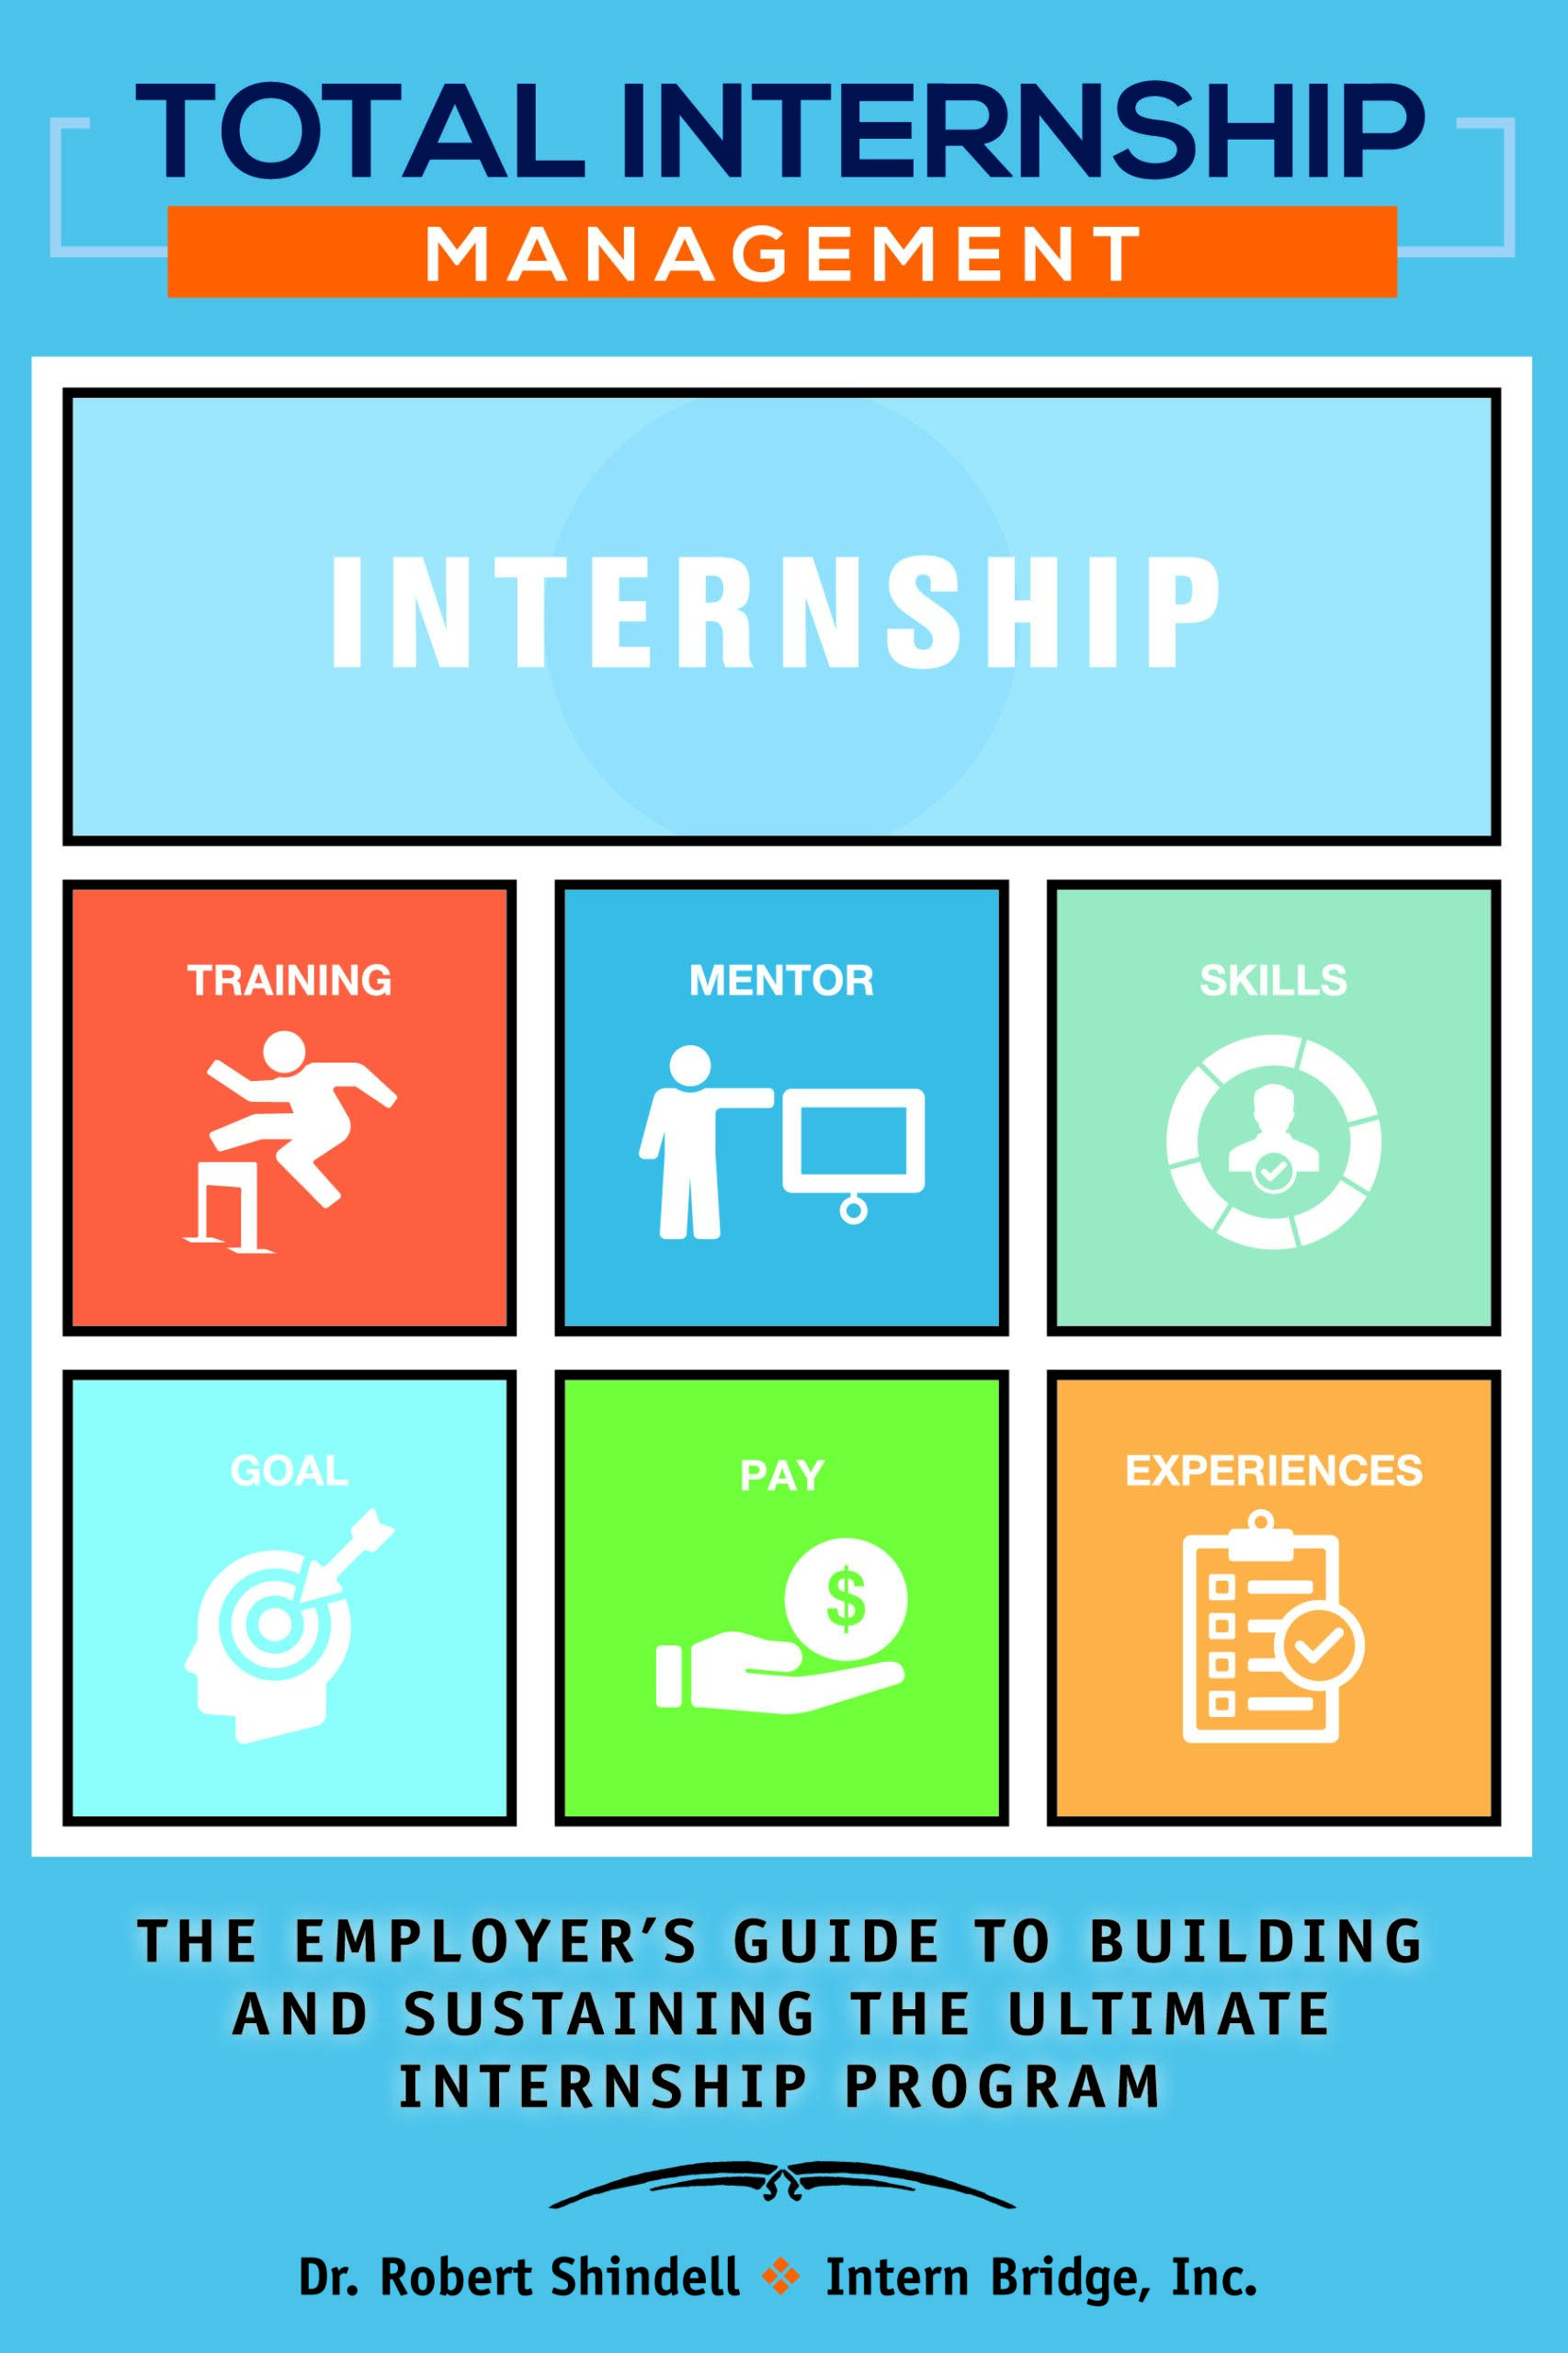 image of the front cover of the Total Internship Management book by Dr. Robert Shindell